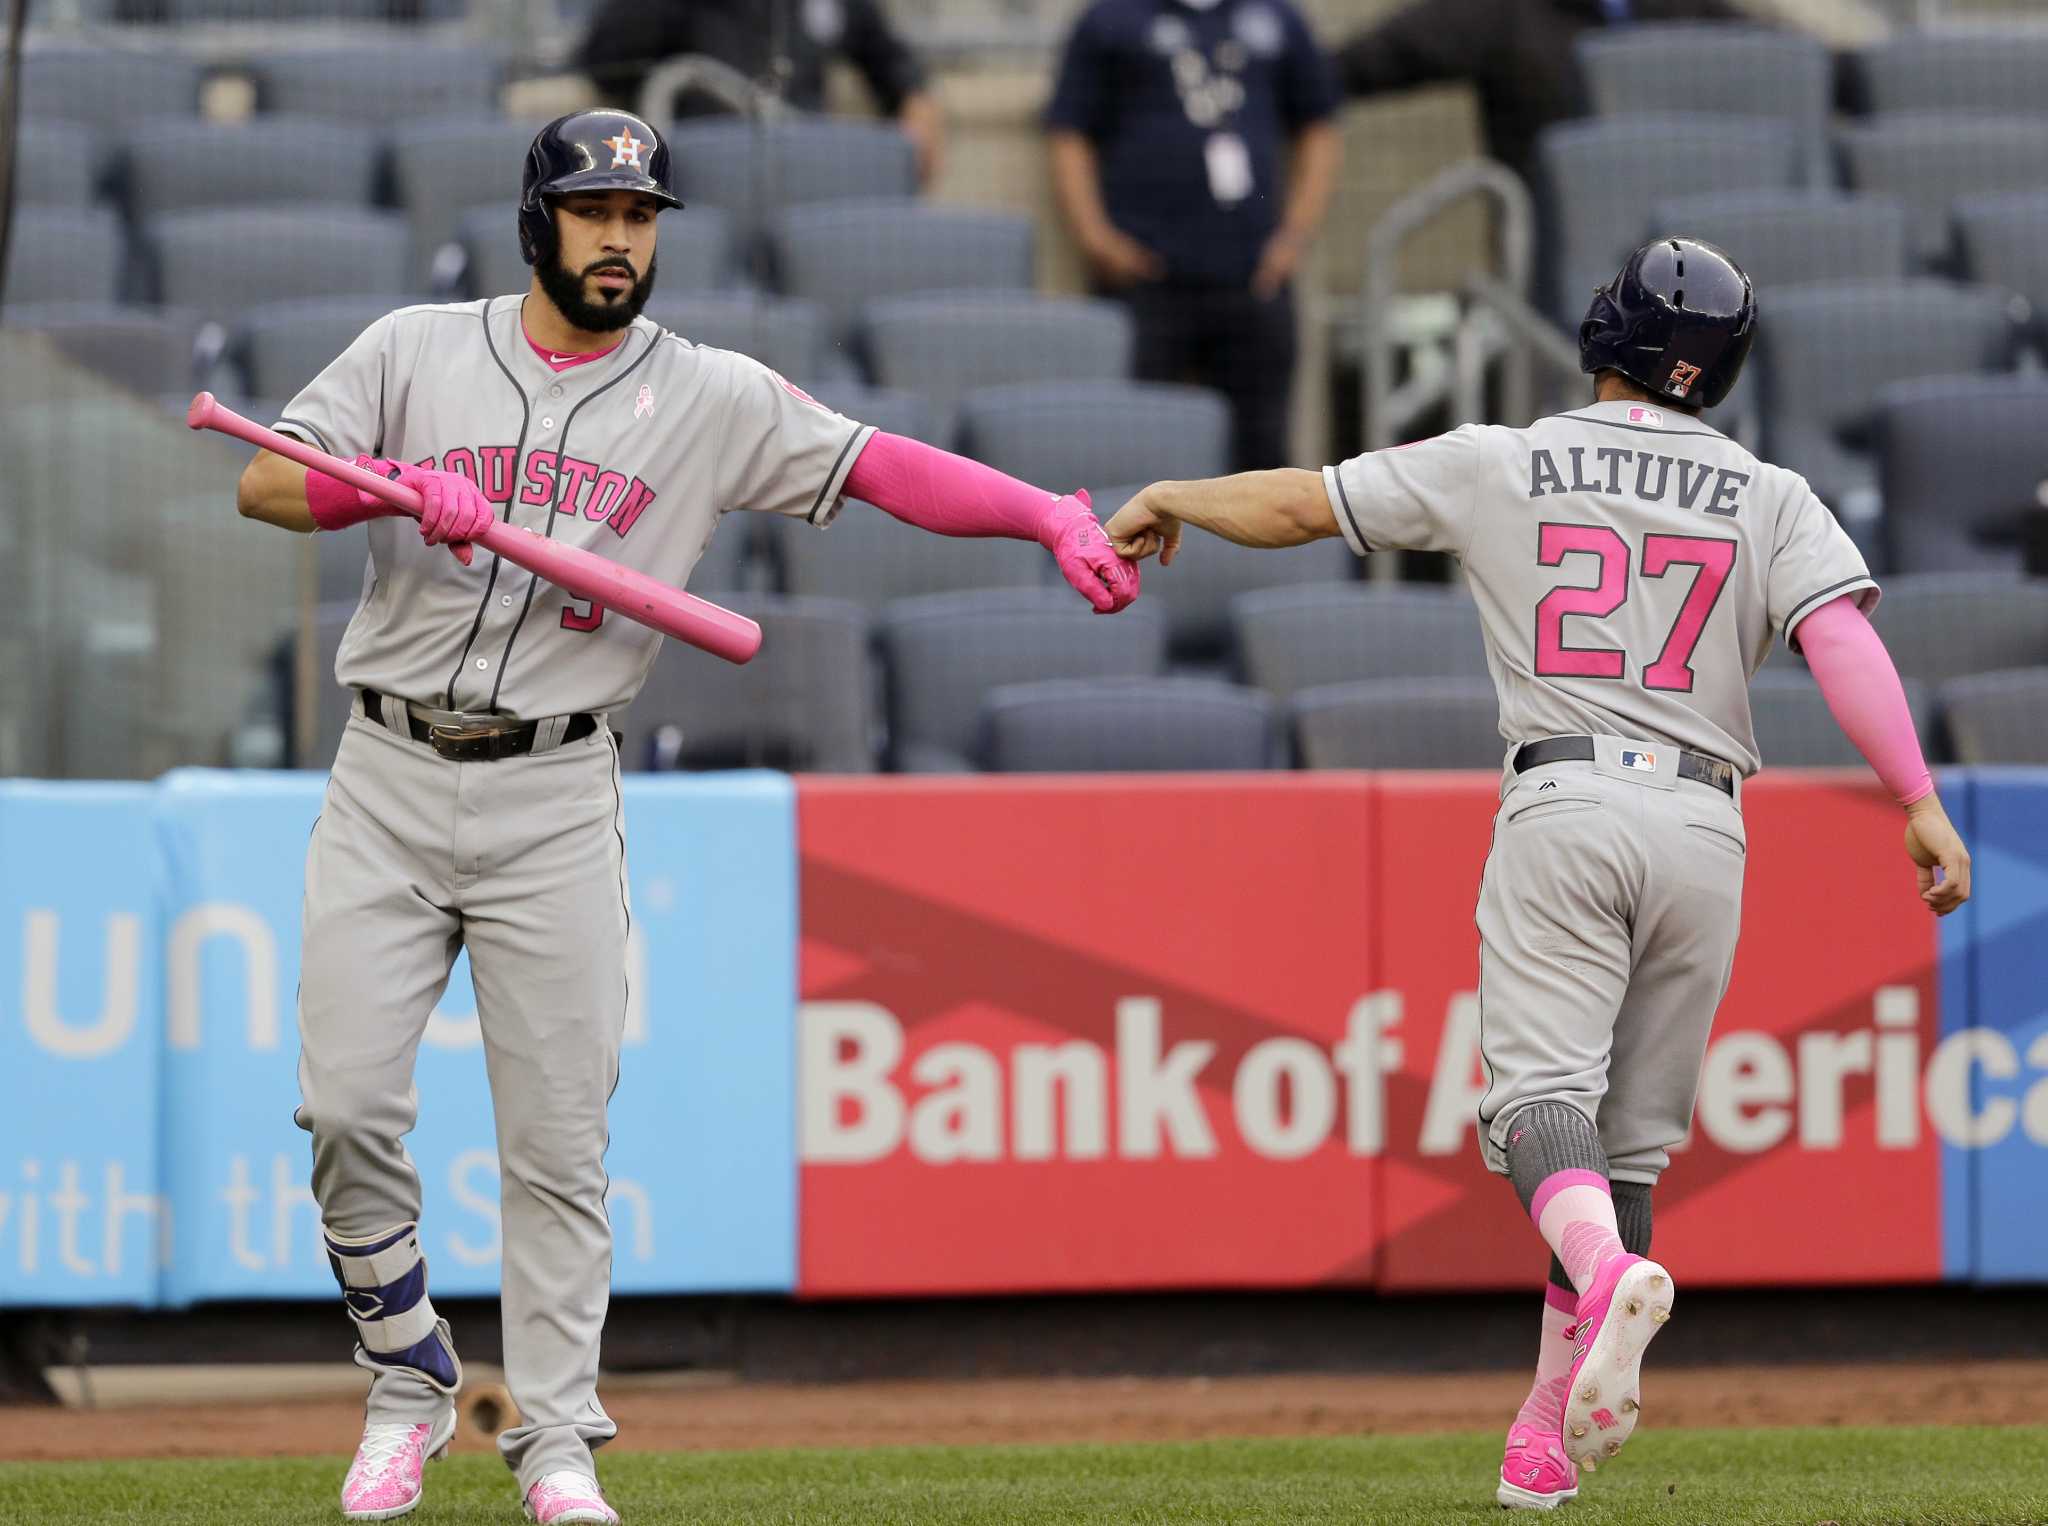 The curious case of Astros star Jose Altuve's pink Mother's Day cleat